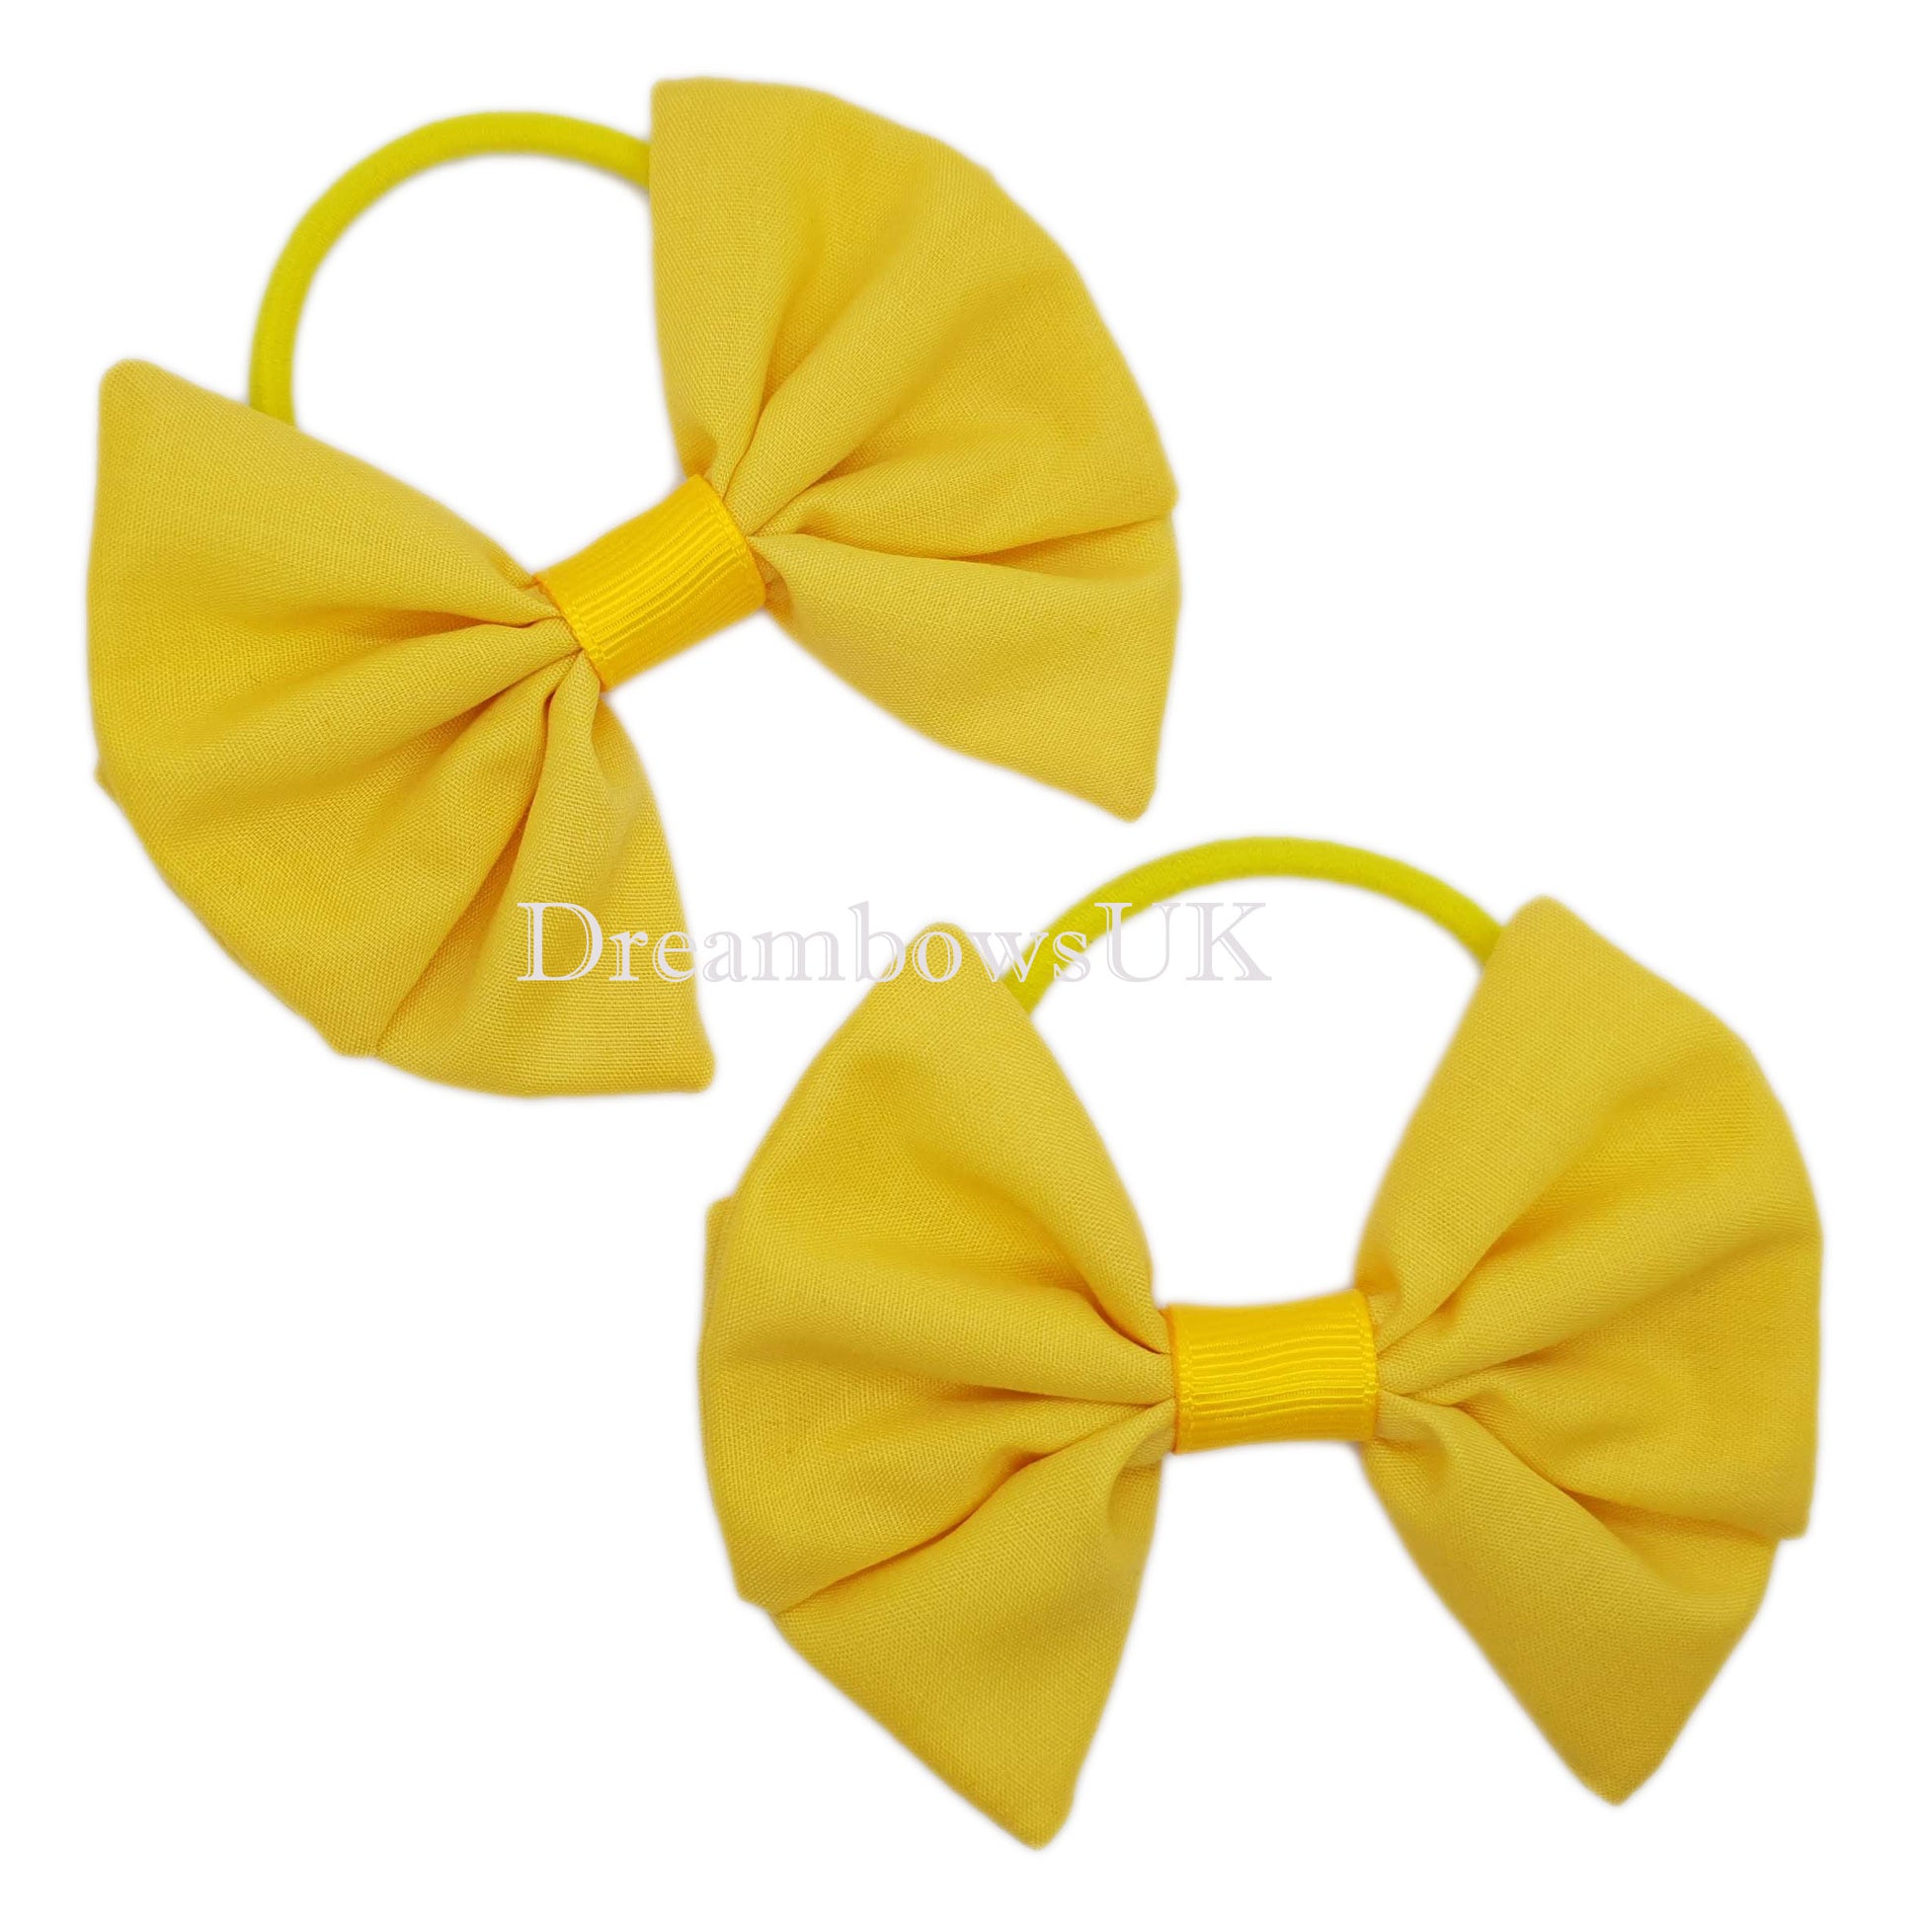 Golden yellow hair bows on thick hair bobbles